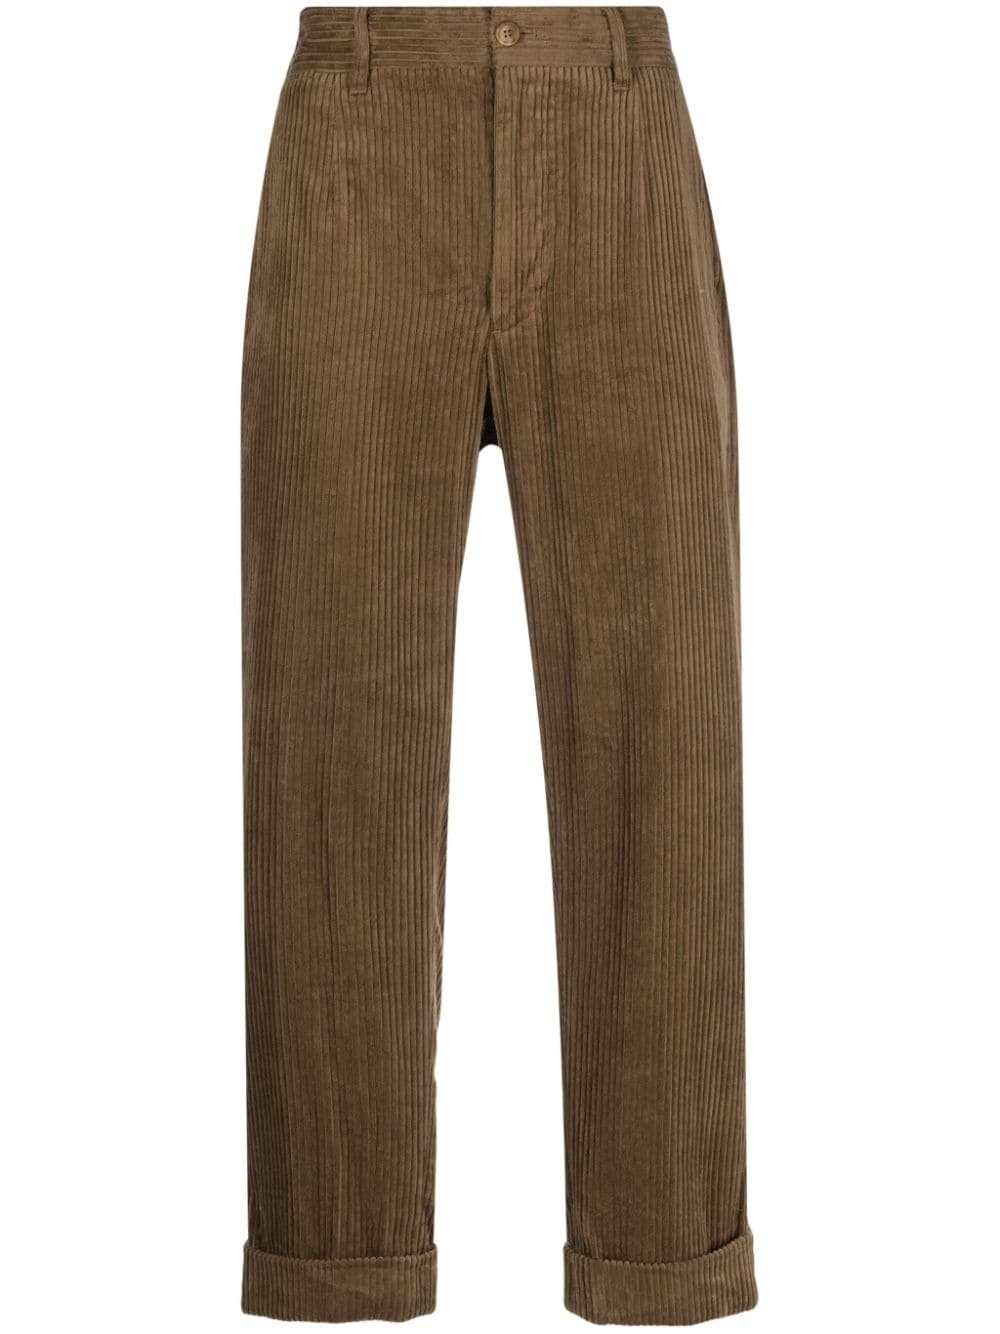 Andover corduroy trousers - 1